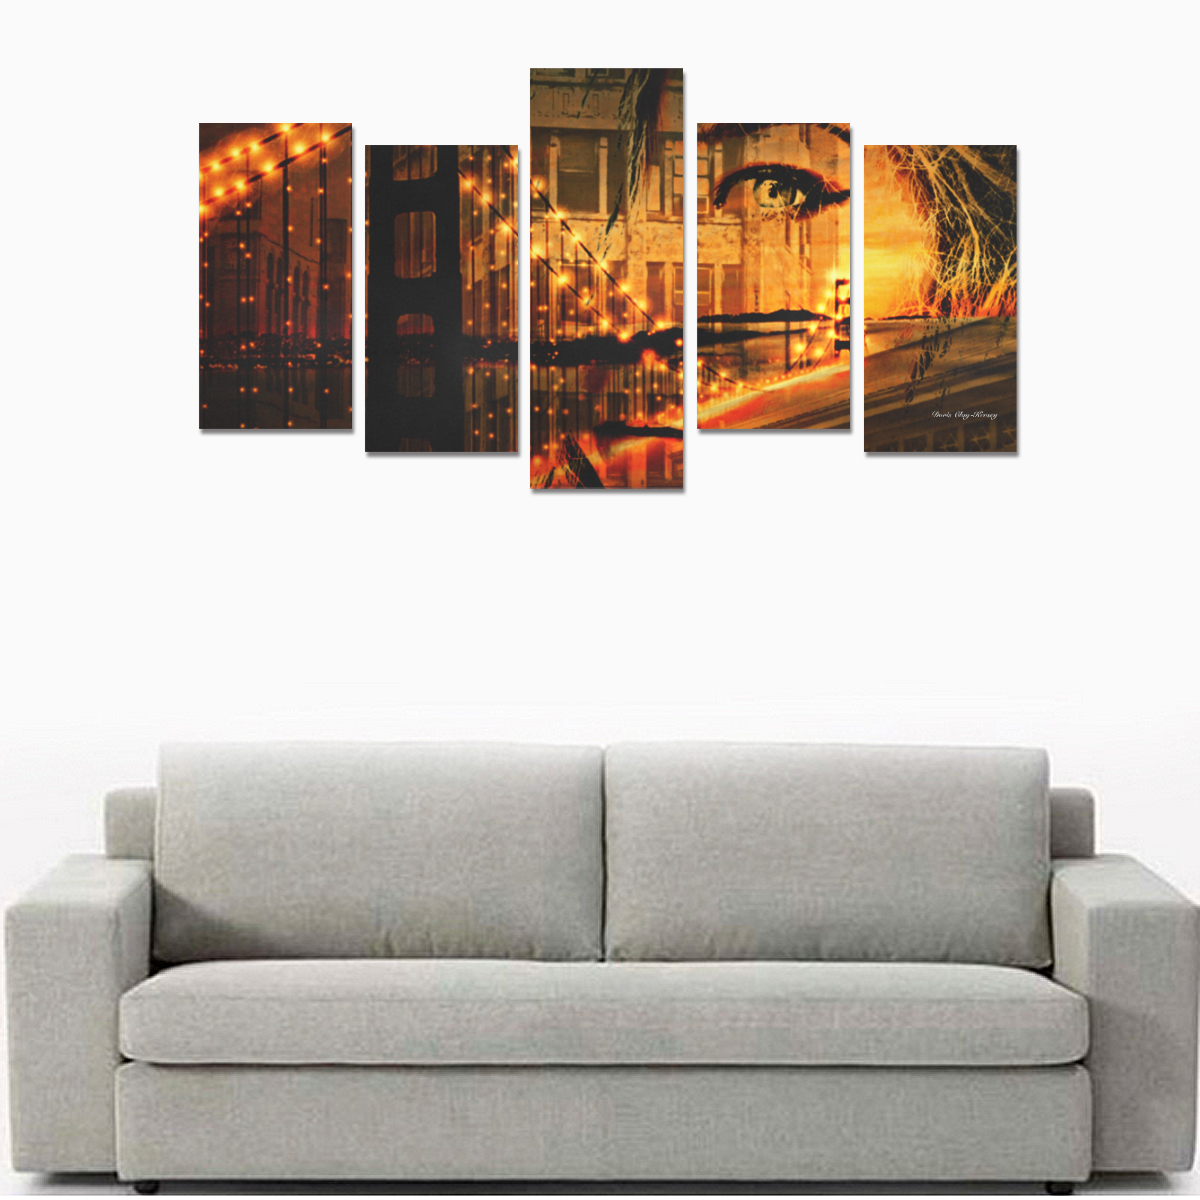 Checking Out the Scenary Design By Me by Doris Clay-Kersey Canvas Print Sets E (No Frame)